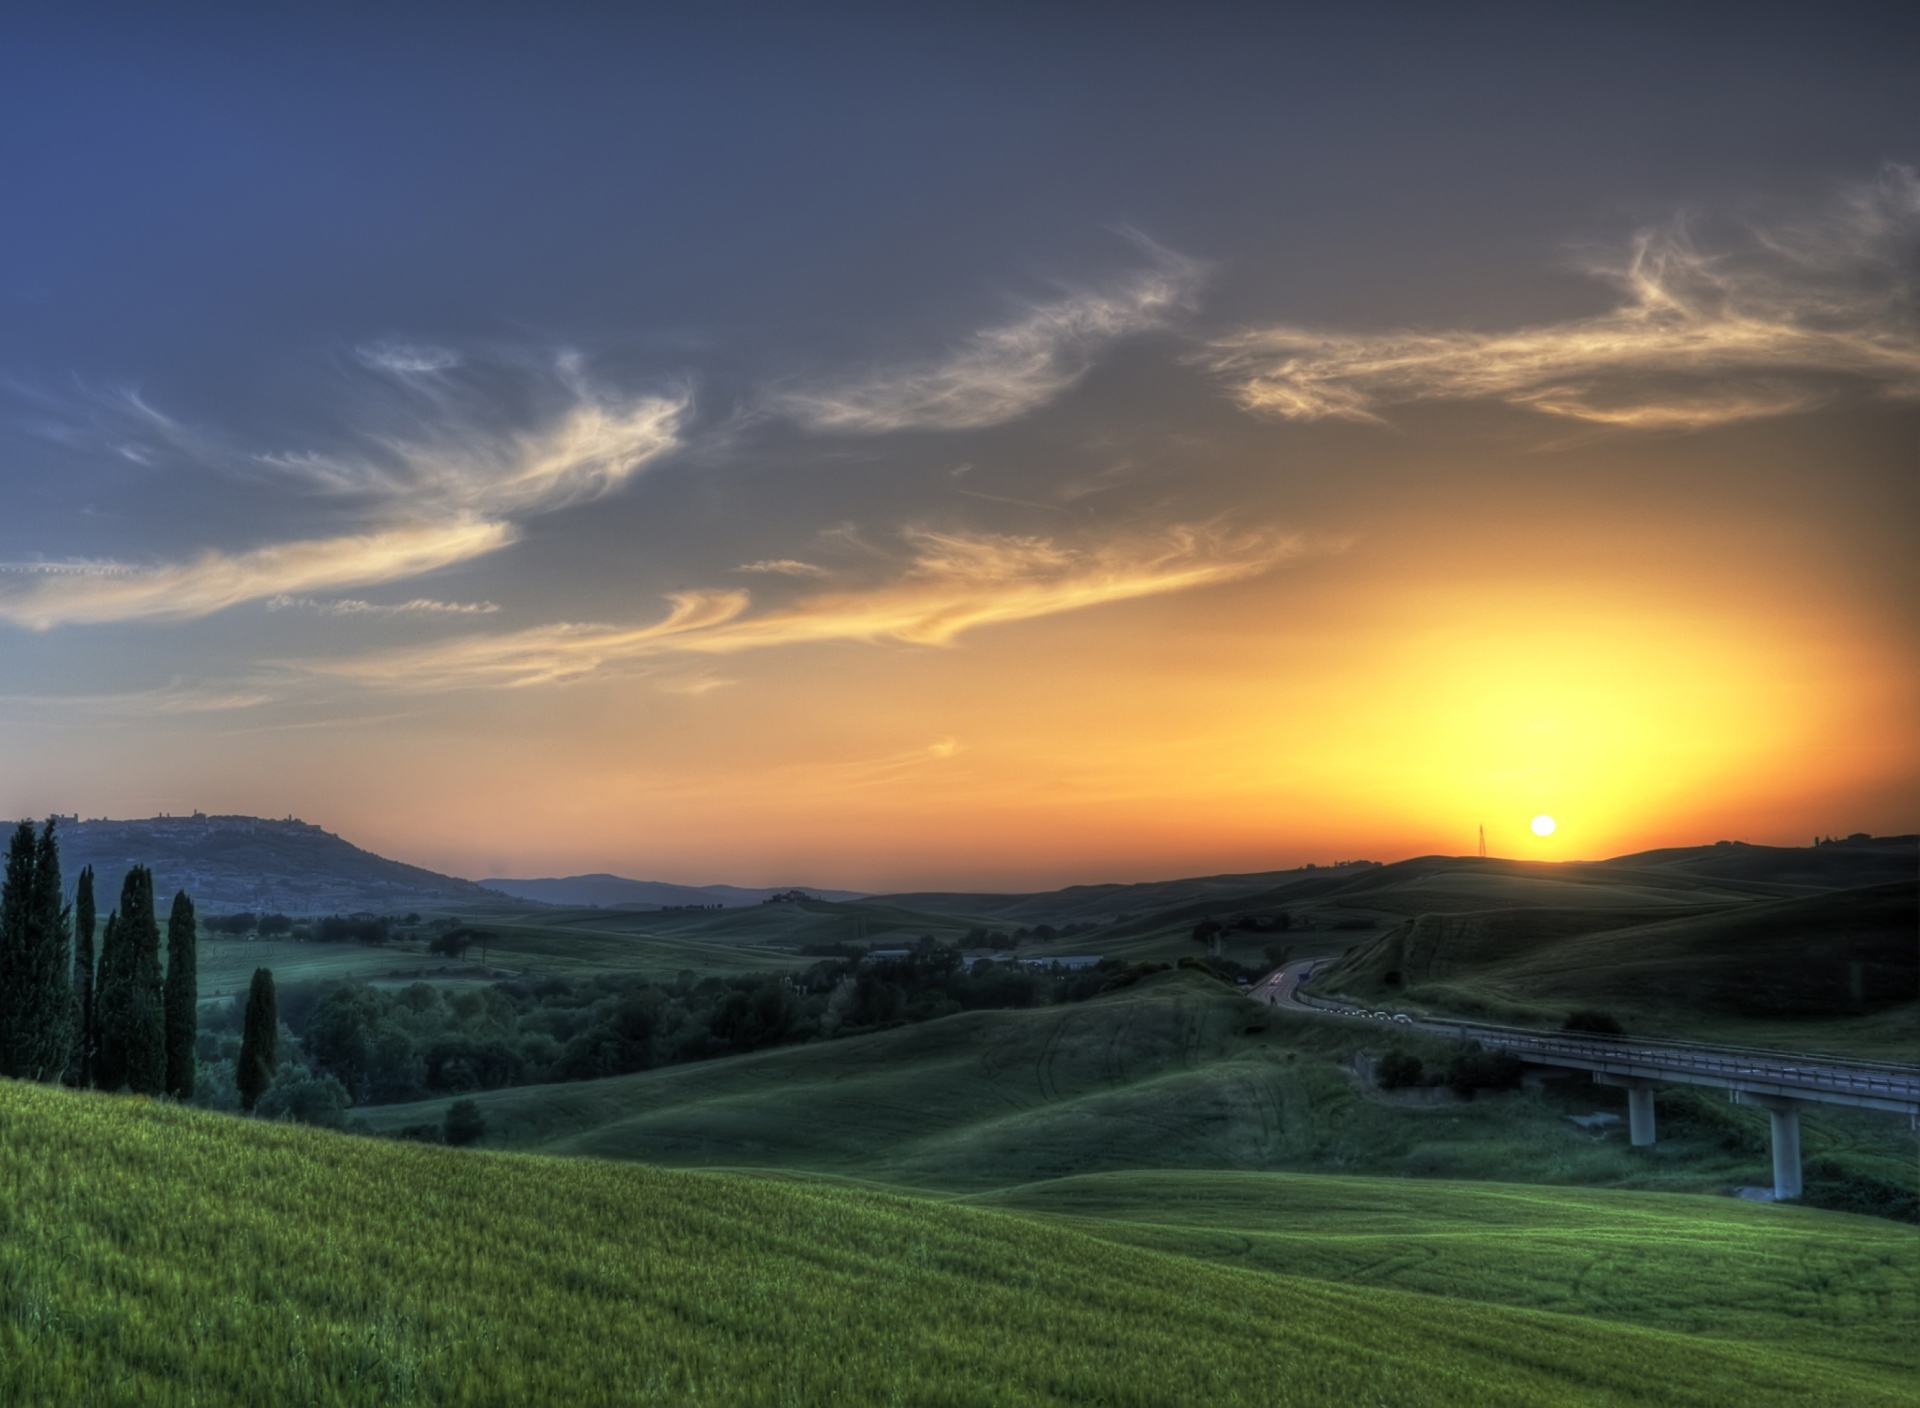 Sunset In Tuscany wallpaper 1920x1408